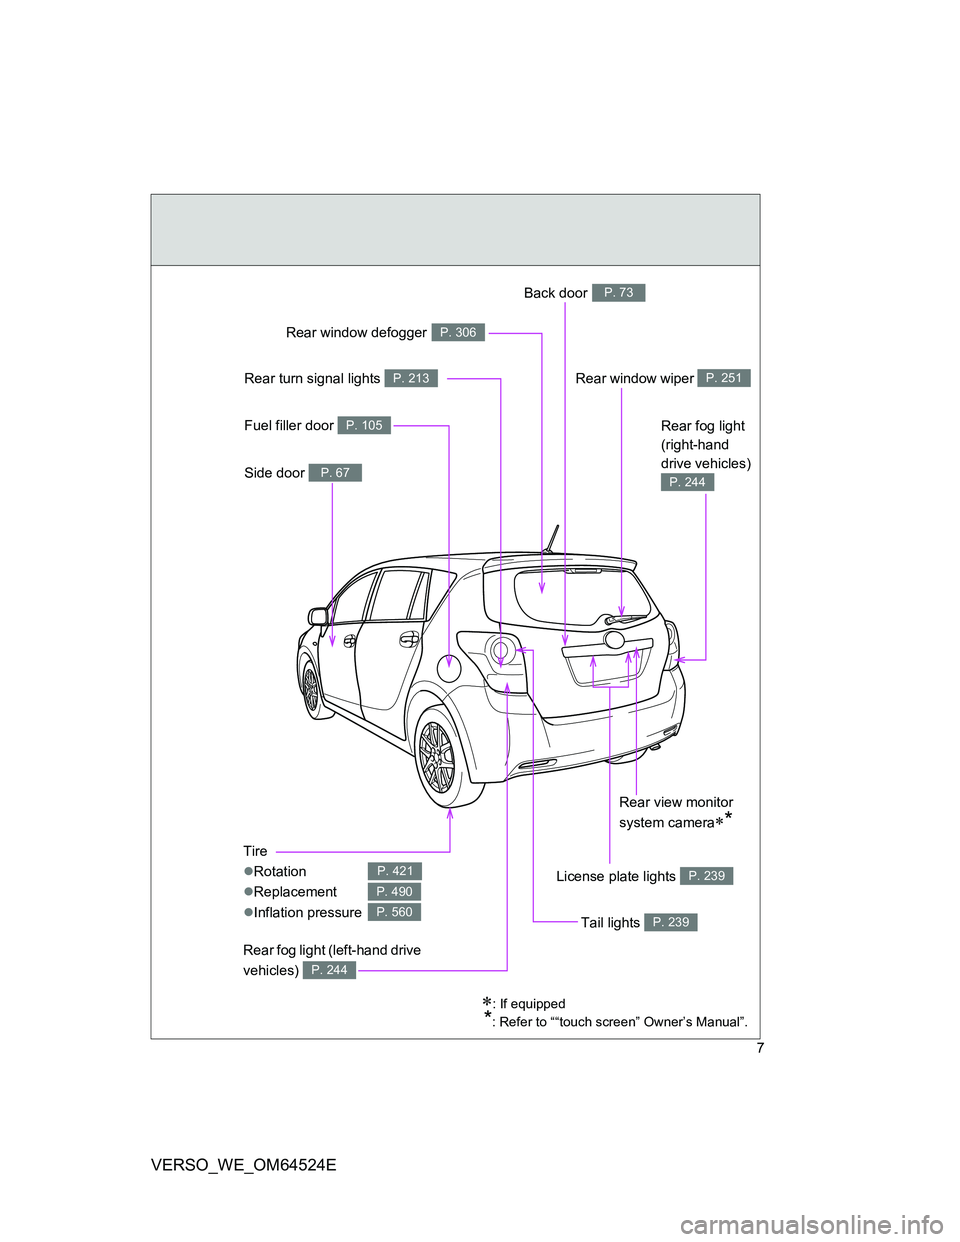 TOYOTA VERSO 2012  Owners Manual 7
VERSO_WE_OM64524E
Tire
Rotation
Replacement
Inflation pressure
P. 421
P. 490
P. 560
Rear window wiper P. 251
Side door P. 67
Fuel filler door P. 105
Rear fog light (left-hand drive 
vehicle